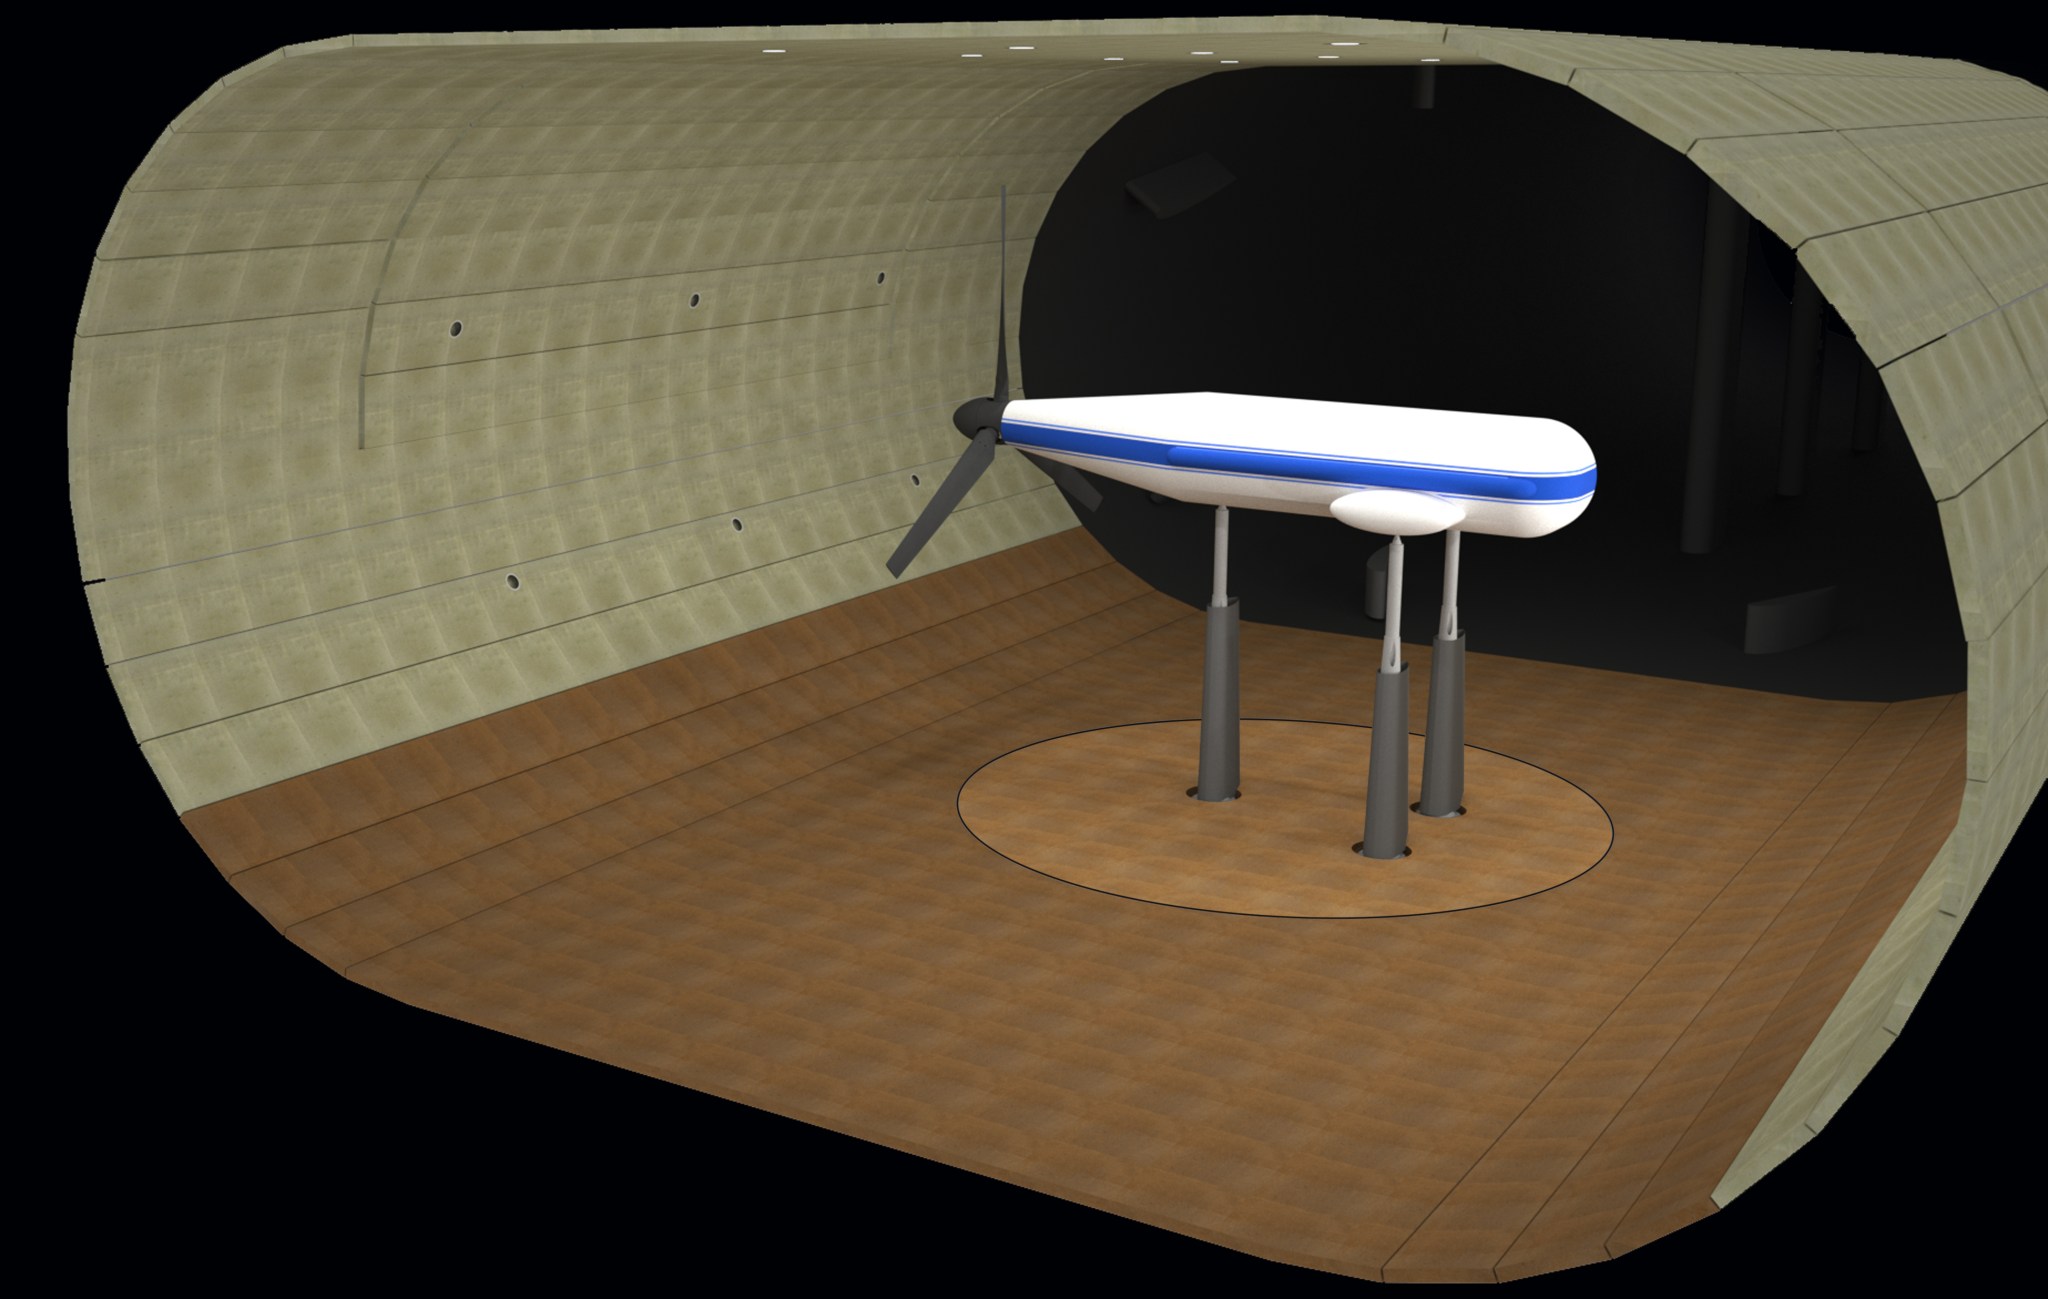 A computer rendered image showing the Tiltrotor Test Rig inside a wind tunnel.